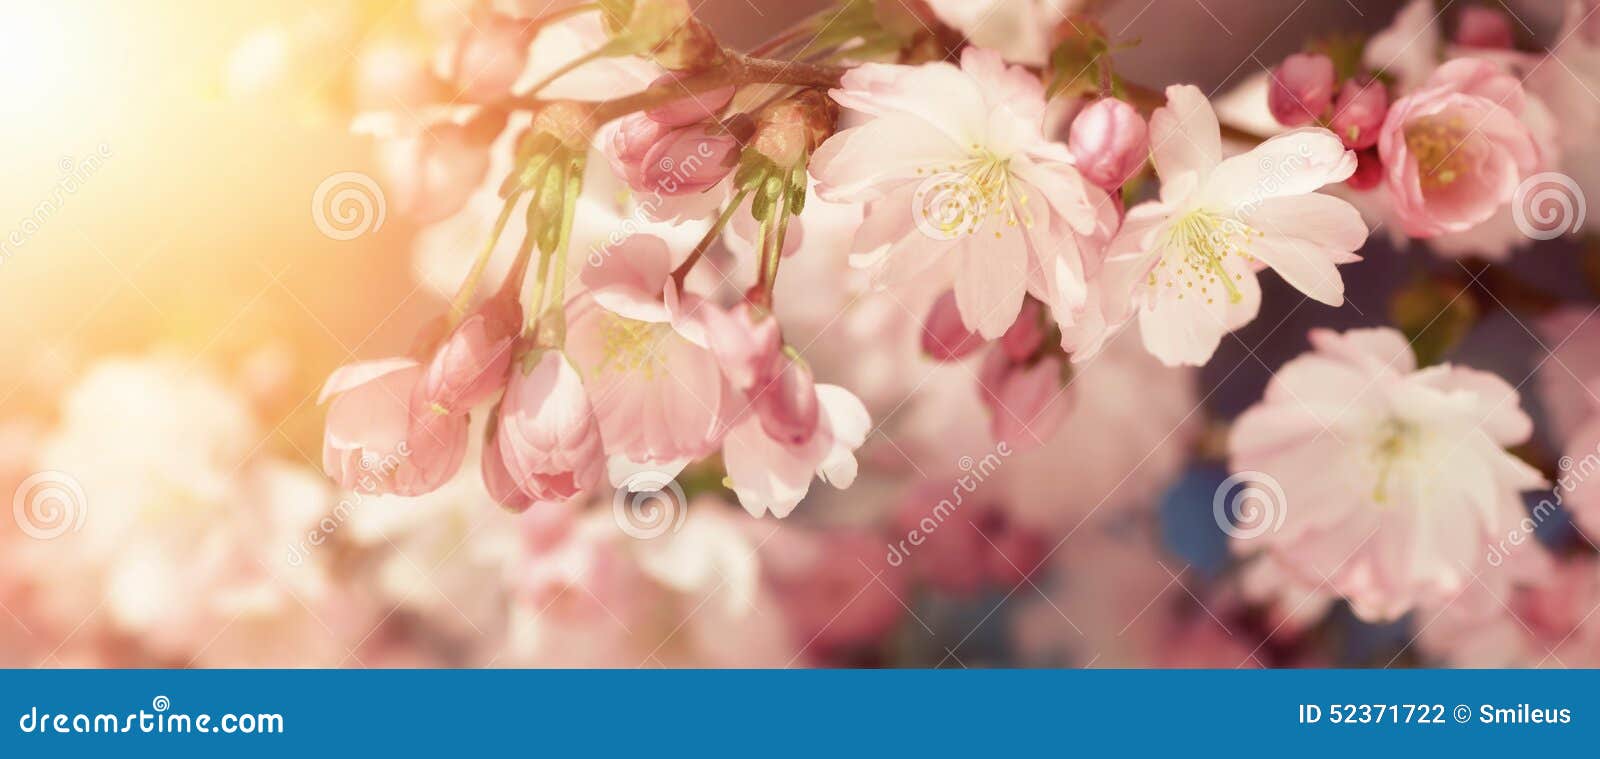 cherry blossoms in retro-styled colors